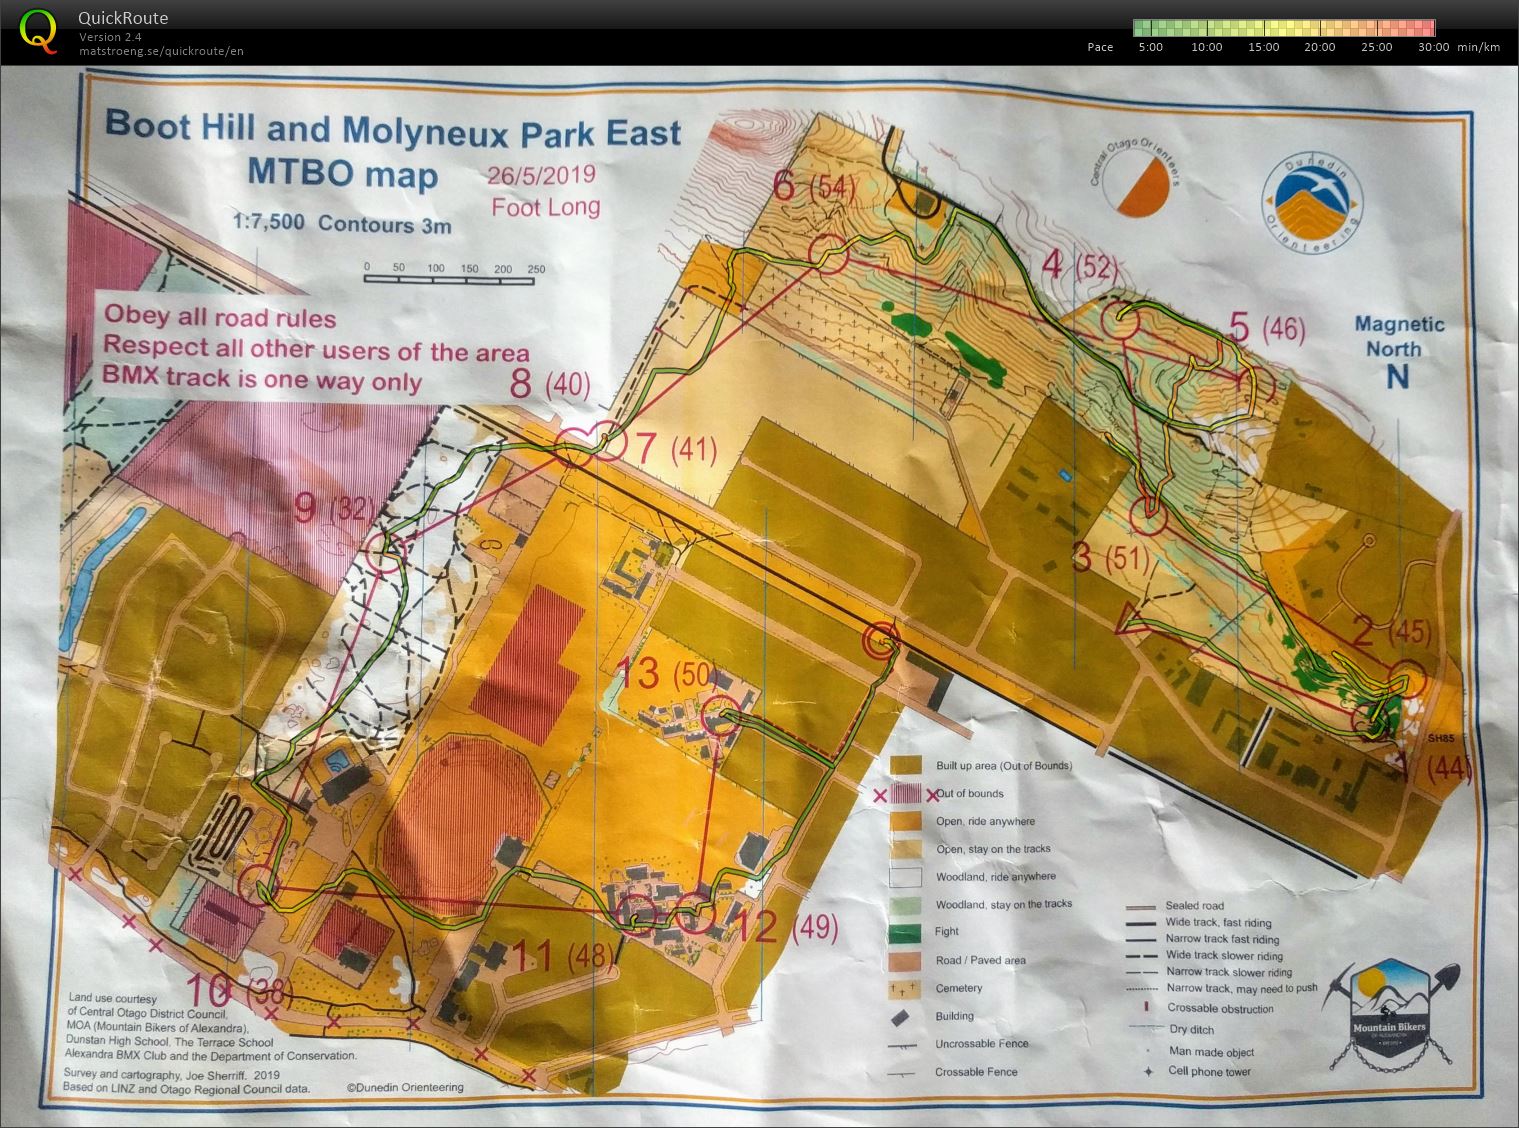 Boot Hill and Molyneux Park East MTBO - Foot Long (2019-05-26)